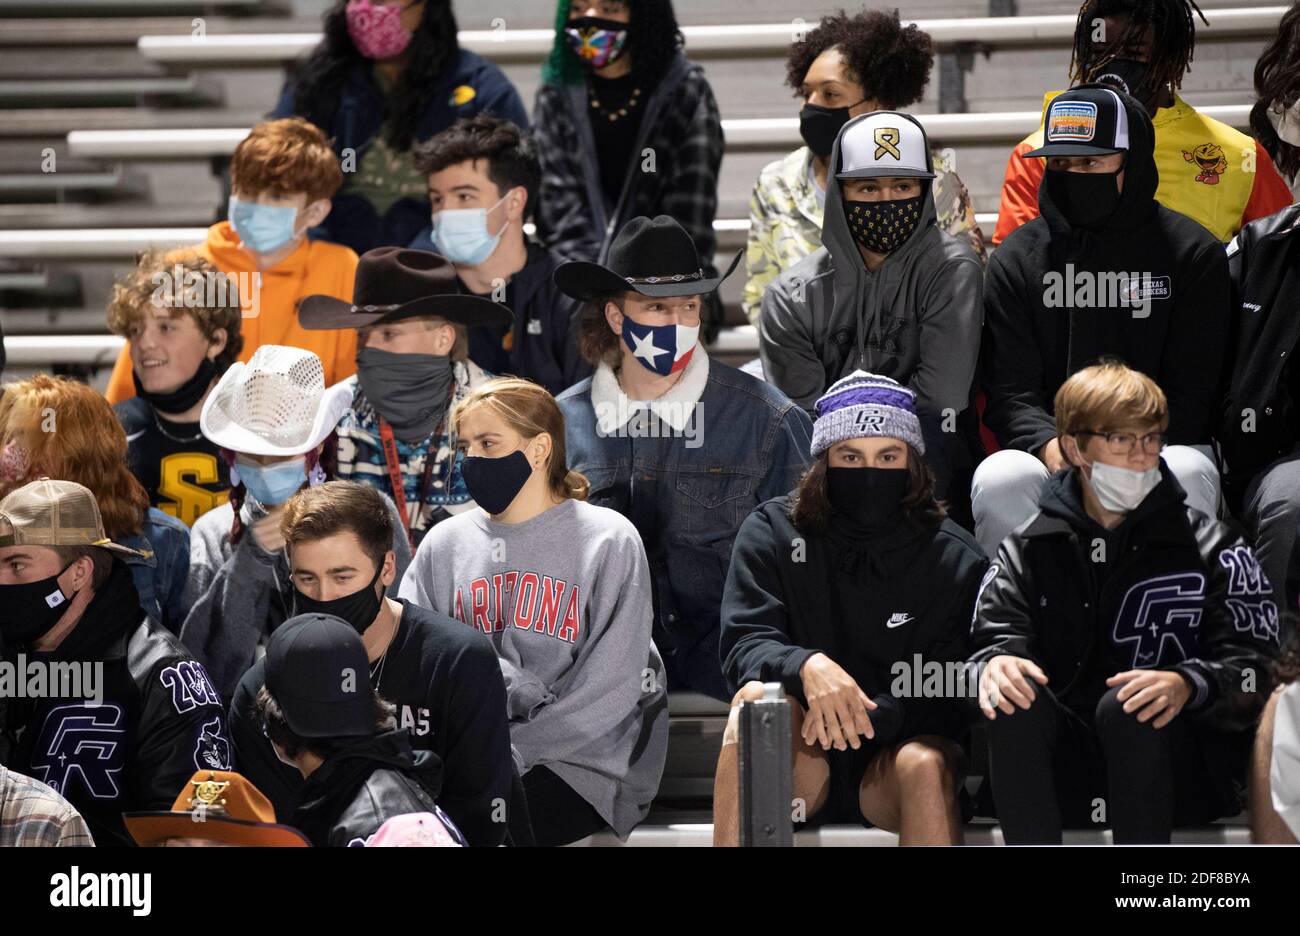 Chilly Cedar Ridge students wear masks and huddle in the stands at a high school football game at Dragon Stadium in Round Rock, Texas on a cold and windy Friday night during the COVID pandemic. Students did not socially distance themselves. Stock Photo